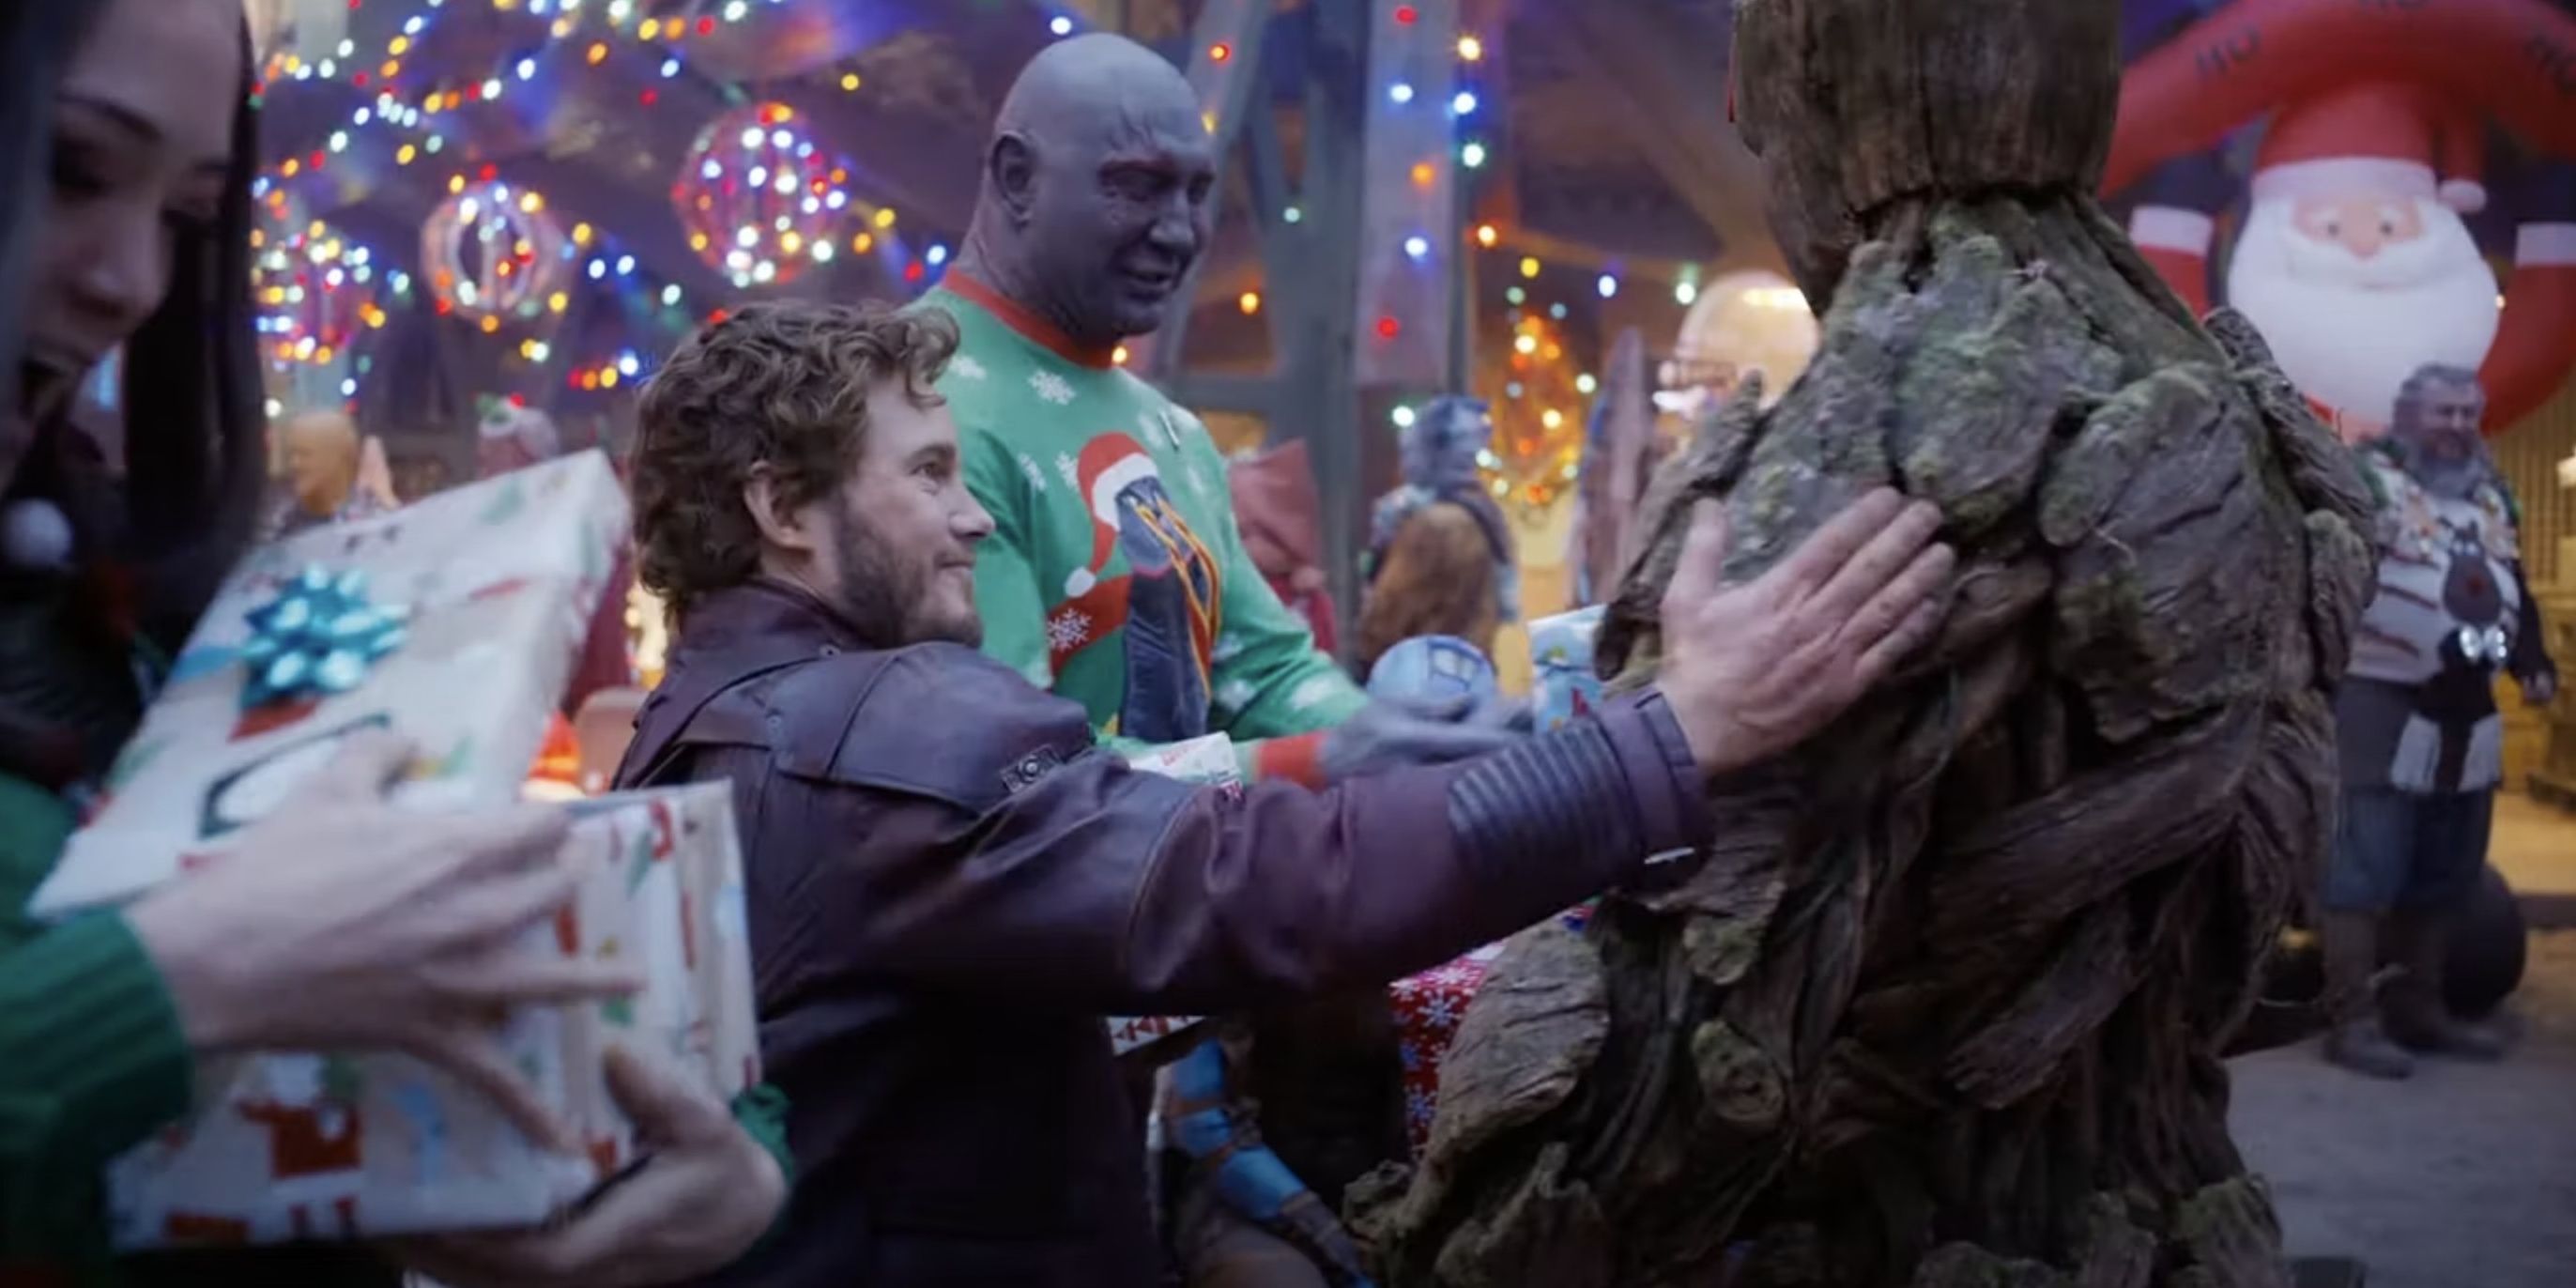 gotg holiday special cast Cropped